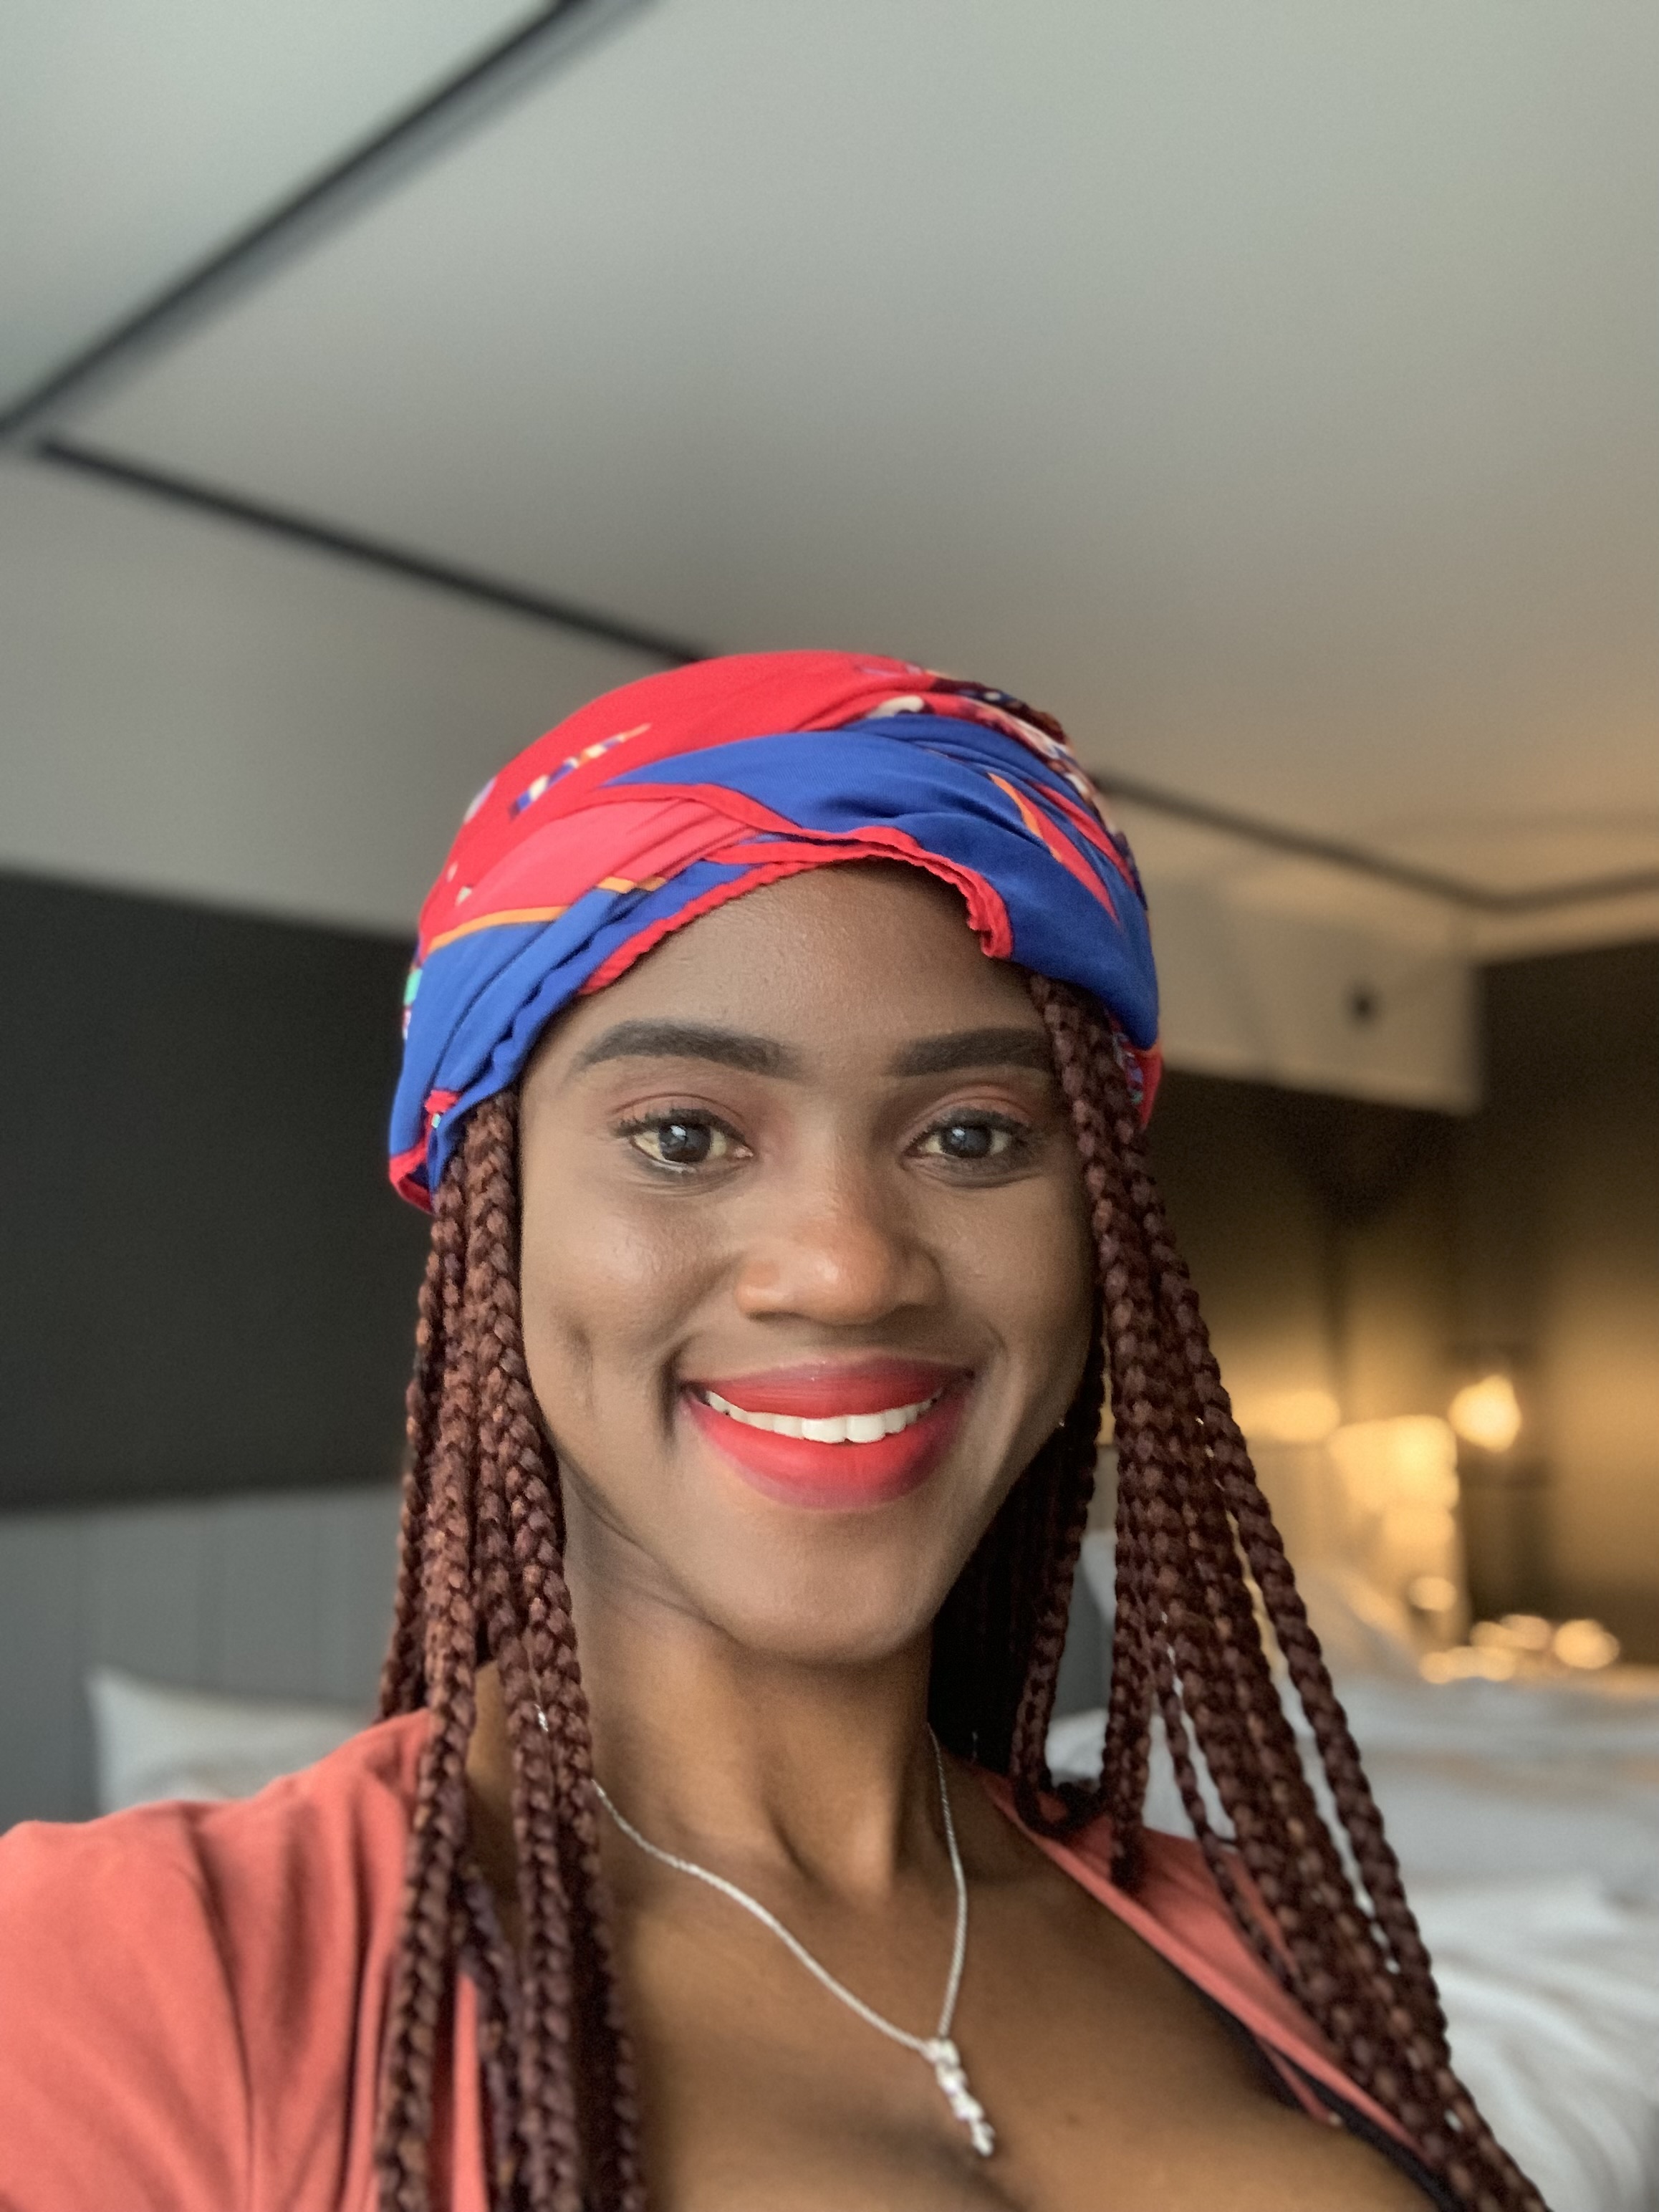 Jayne Adole smiles at camera wearing colorful head wrap.